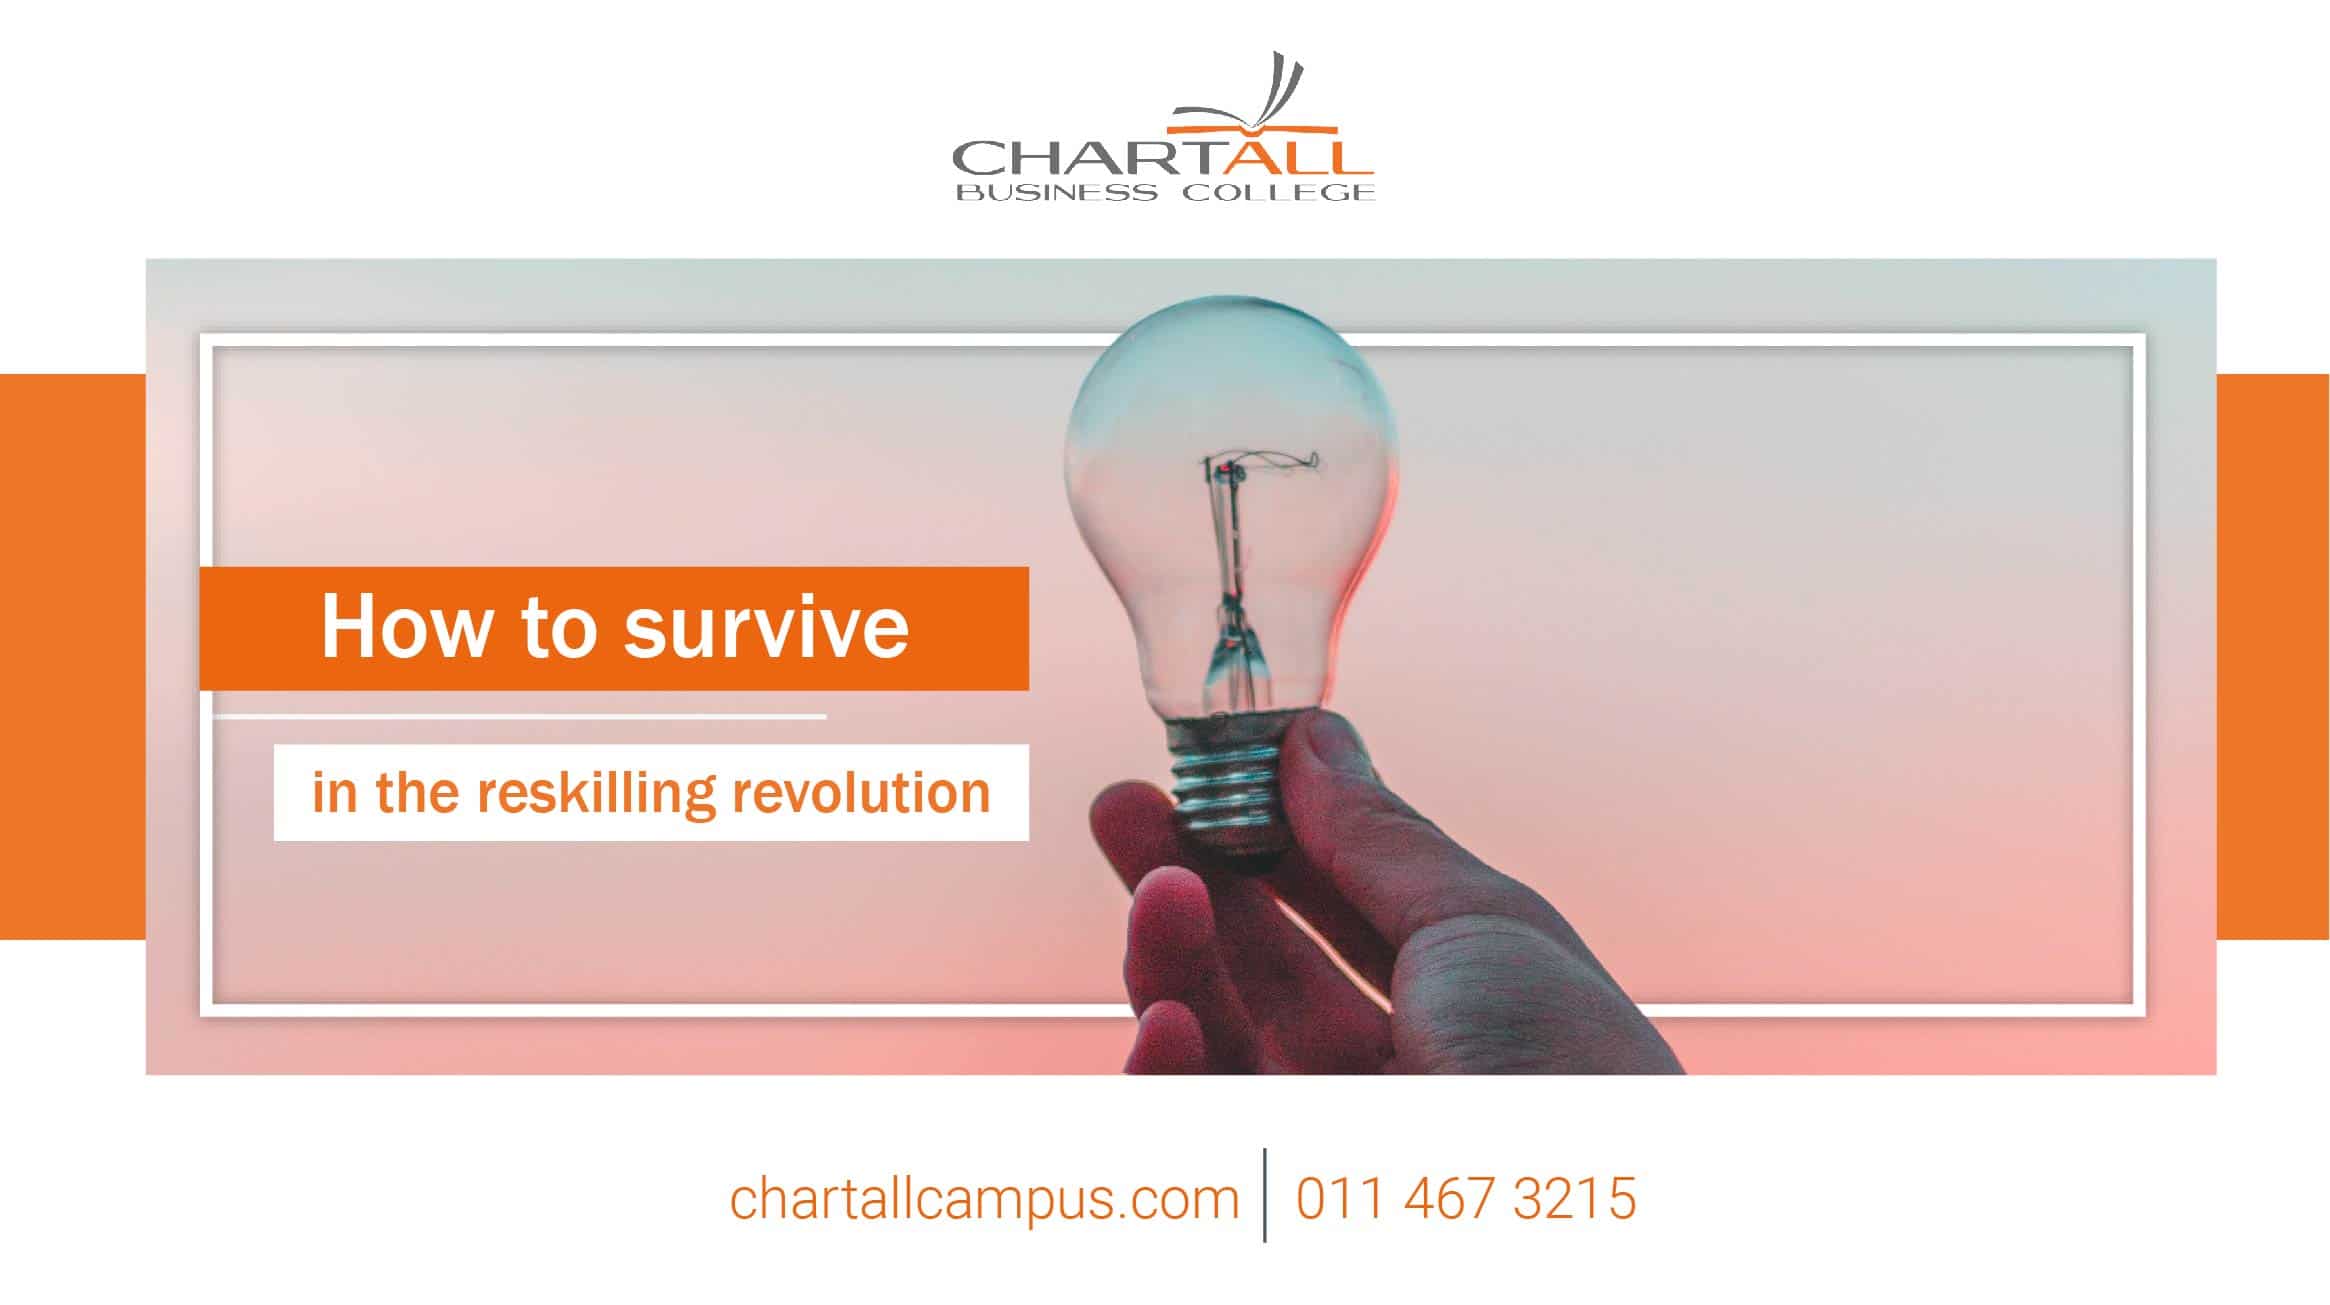 How to survive in the reskilling revolution.